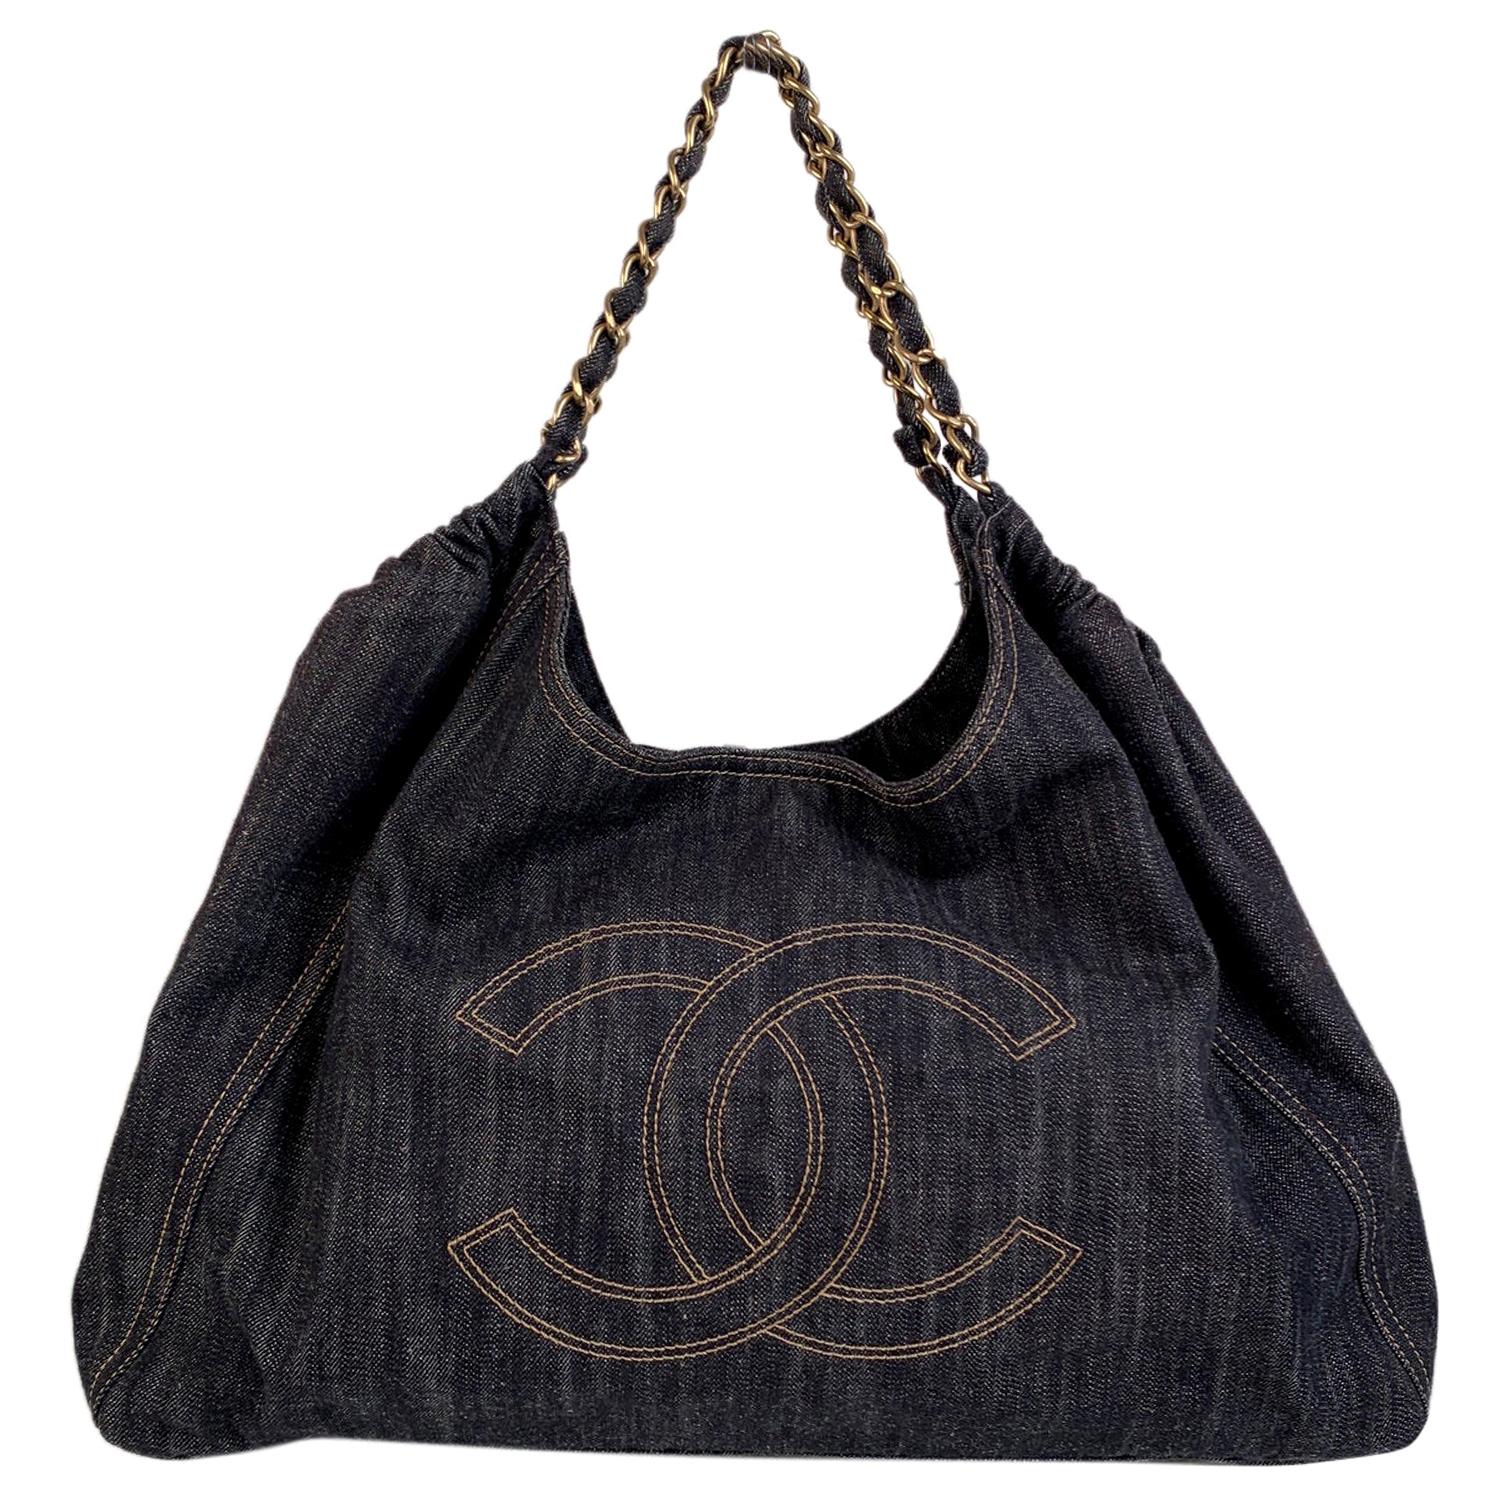 Chanel Denim Tote - 24 For Sale on 1stDibs  chanel jean tote bag, denim  chanel deauville tote, chanel denim tote bag price